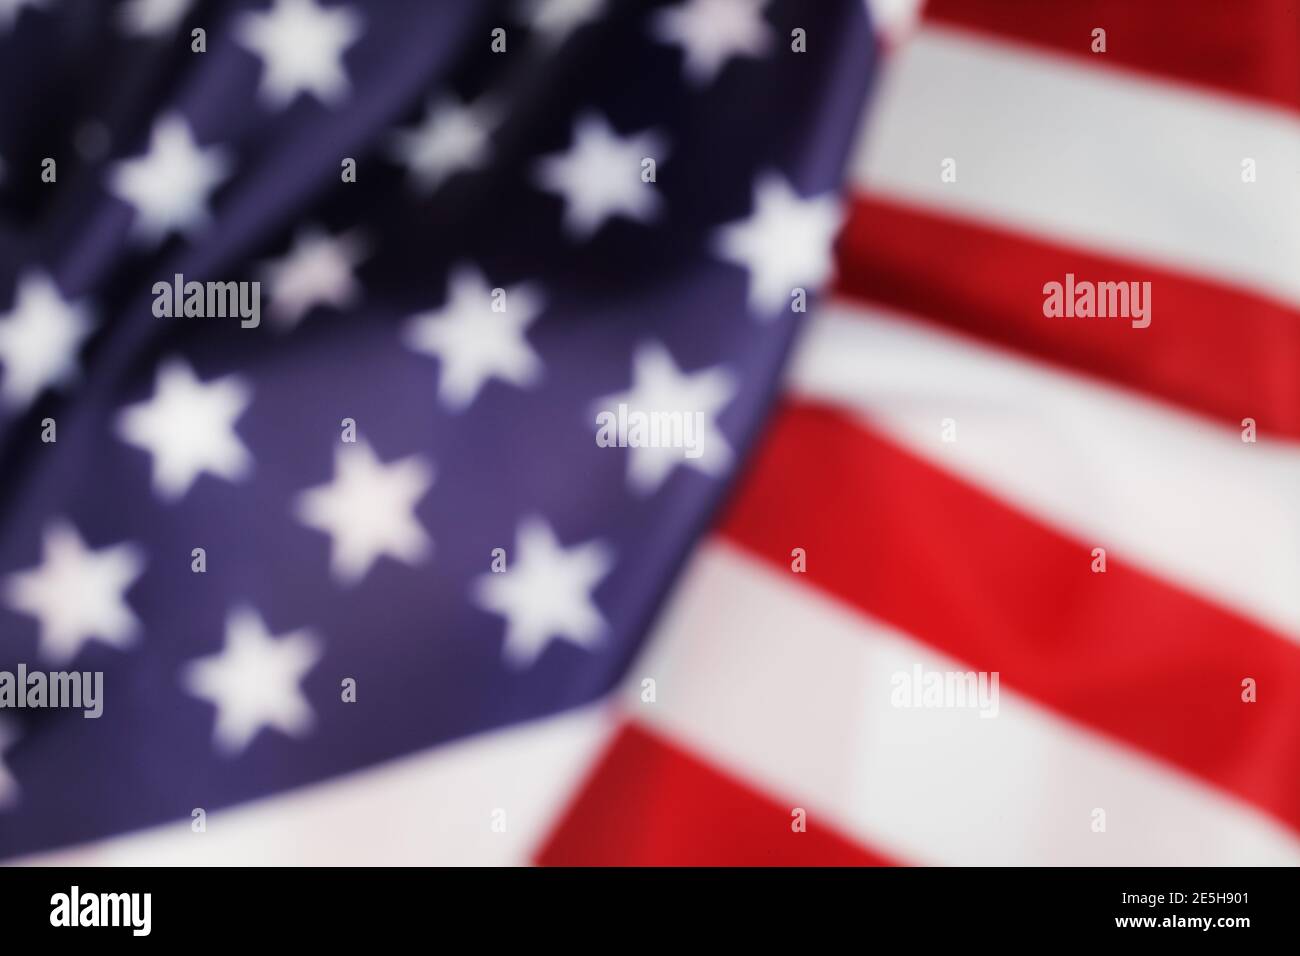 US state flag close-up, out of focus, background. Stock Photo